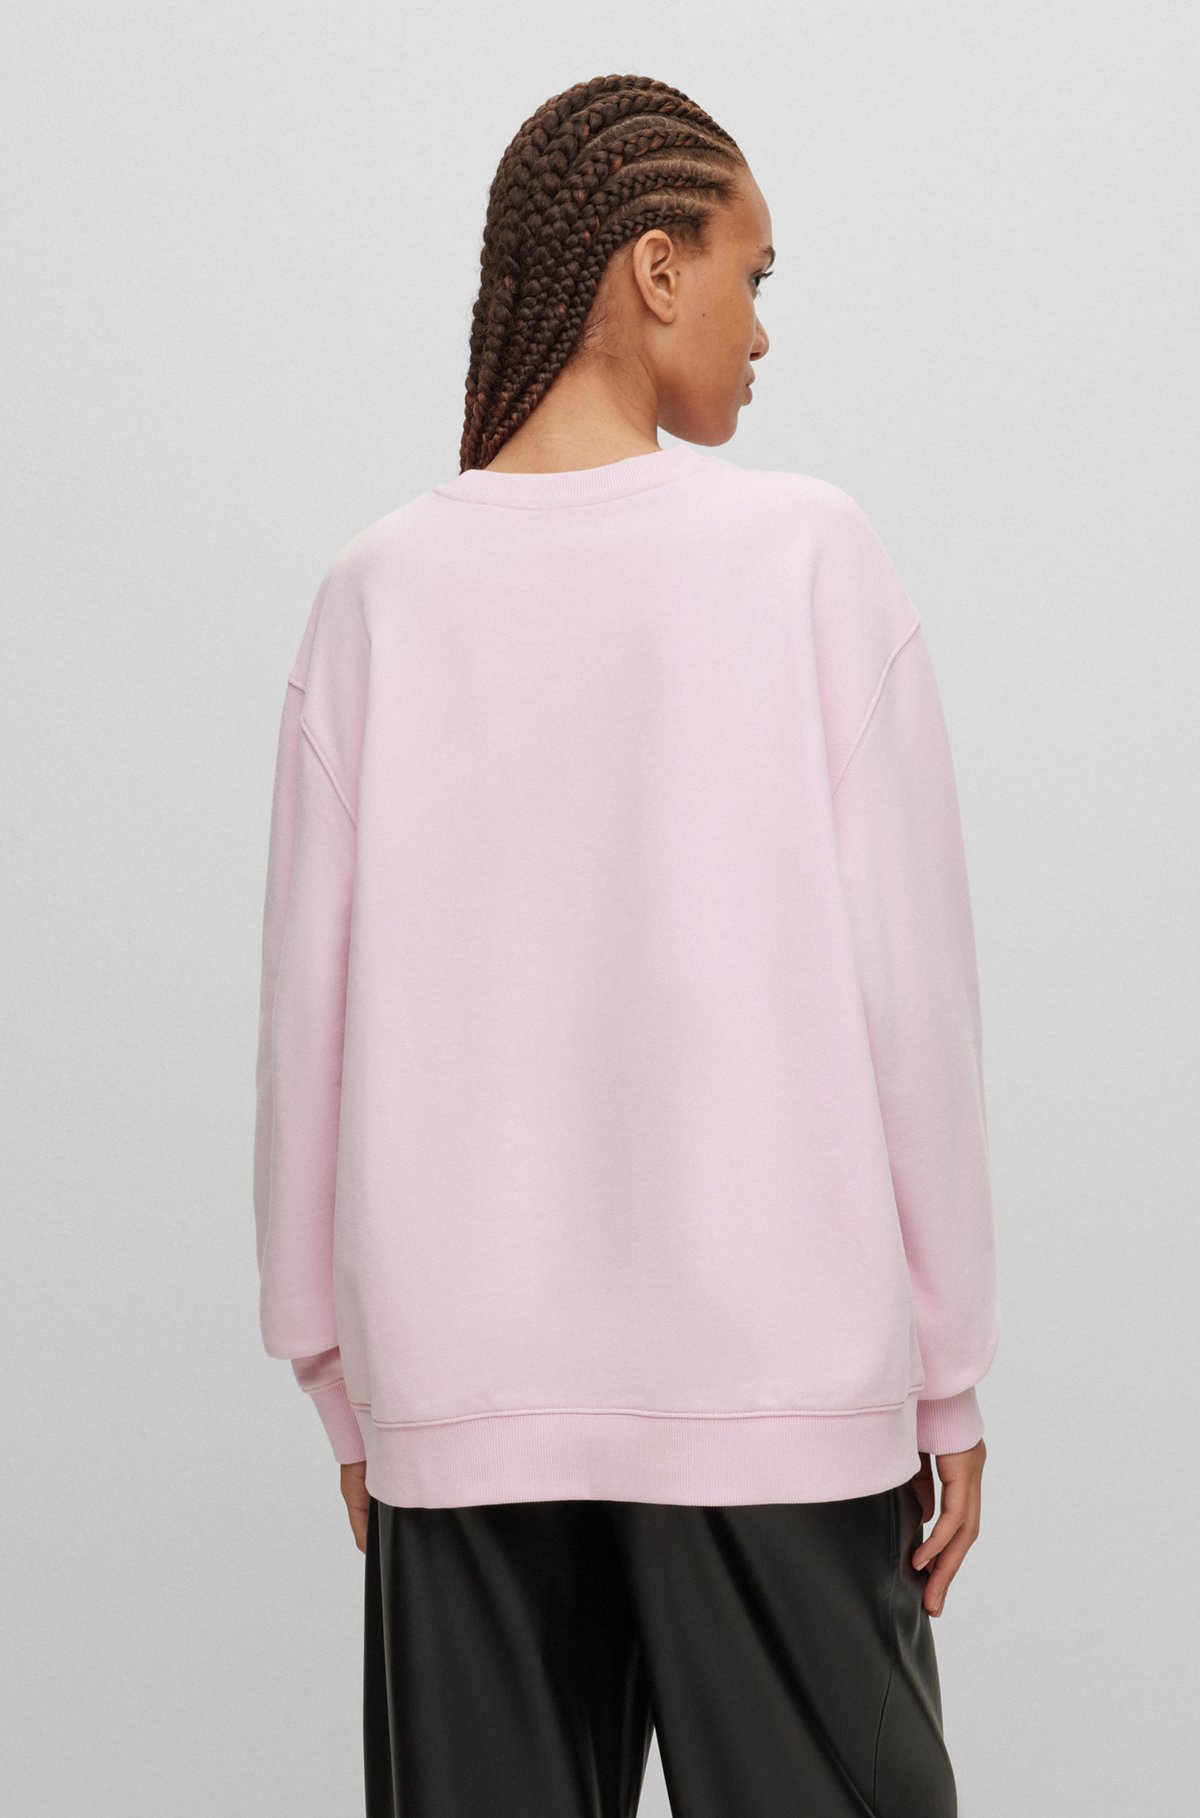 Relaxed-fit sweatshirt with embossed stacked logo, light pink